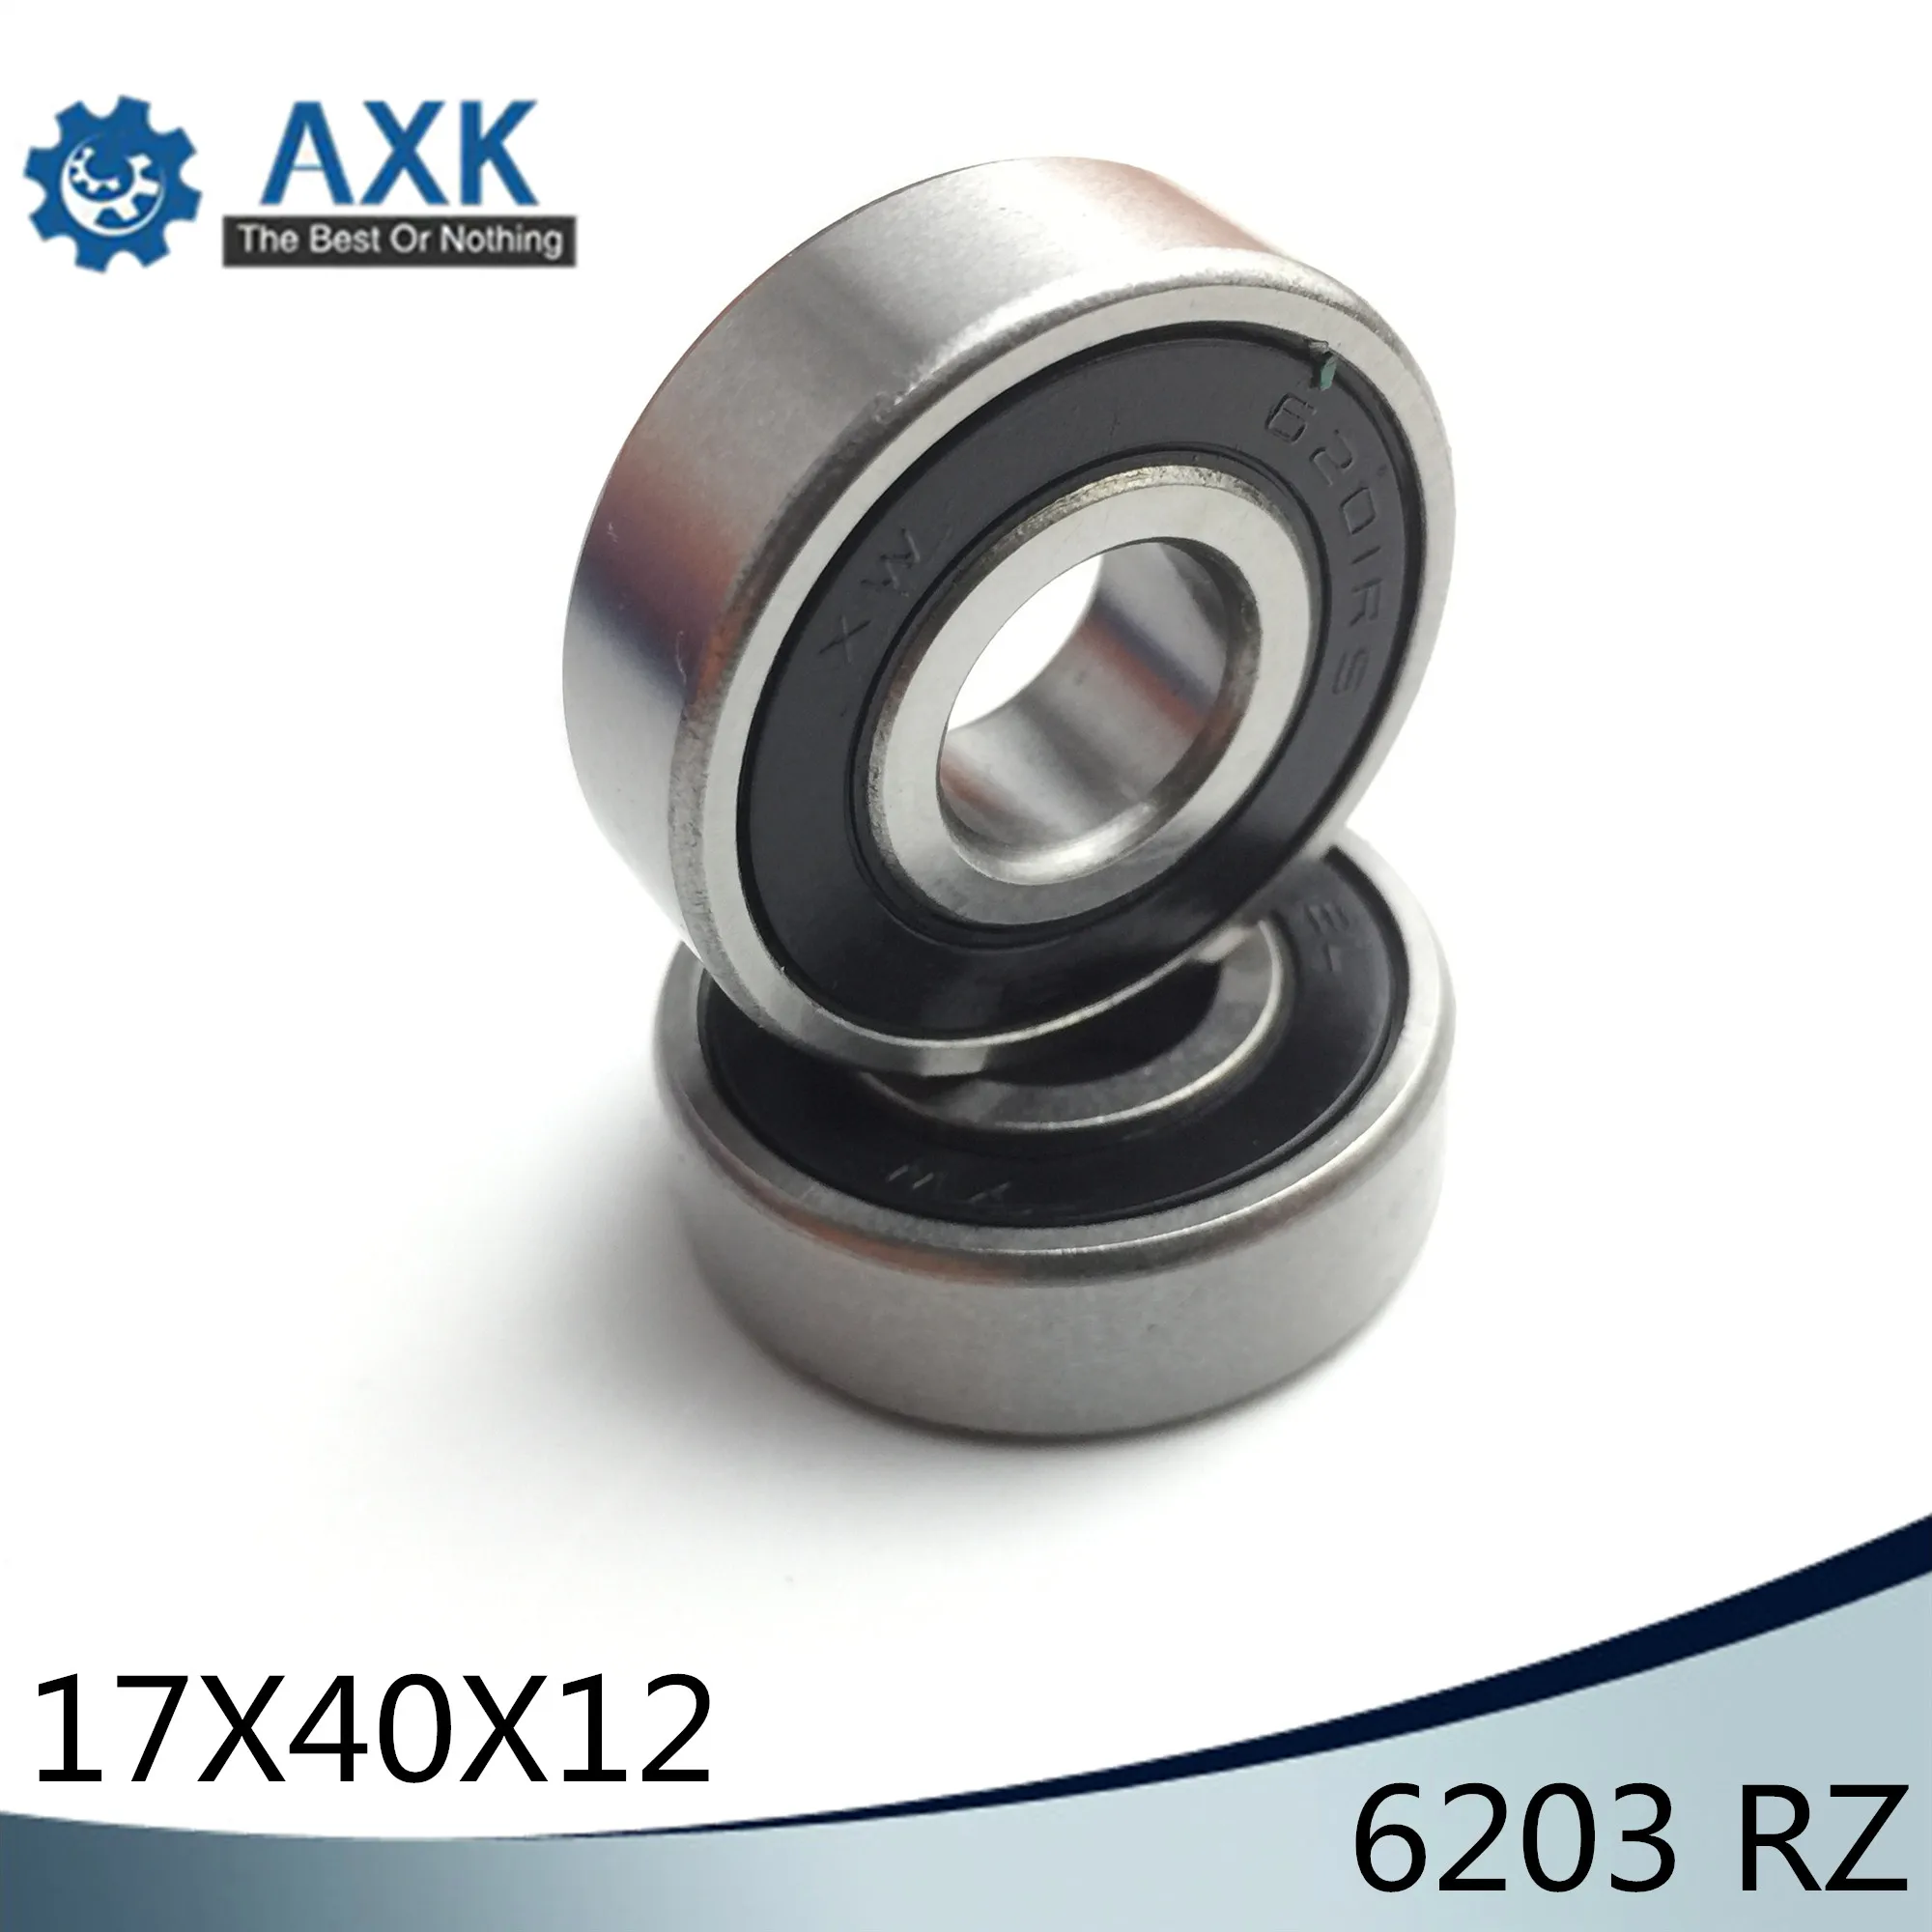 6203RZ Bearing 17*40*12 mm ABEC-3 ( 4 PCS ) Mute High Speed For Motorcycles 6203 RS 2RZ Ball Bearings 6203RS 2RS With Nylon Cage